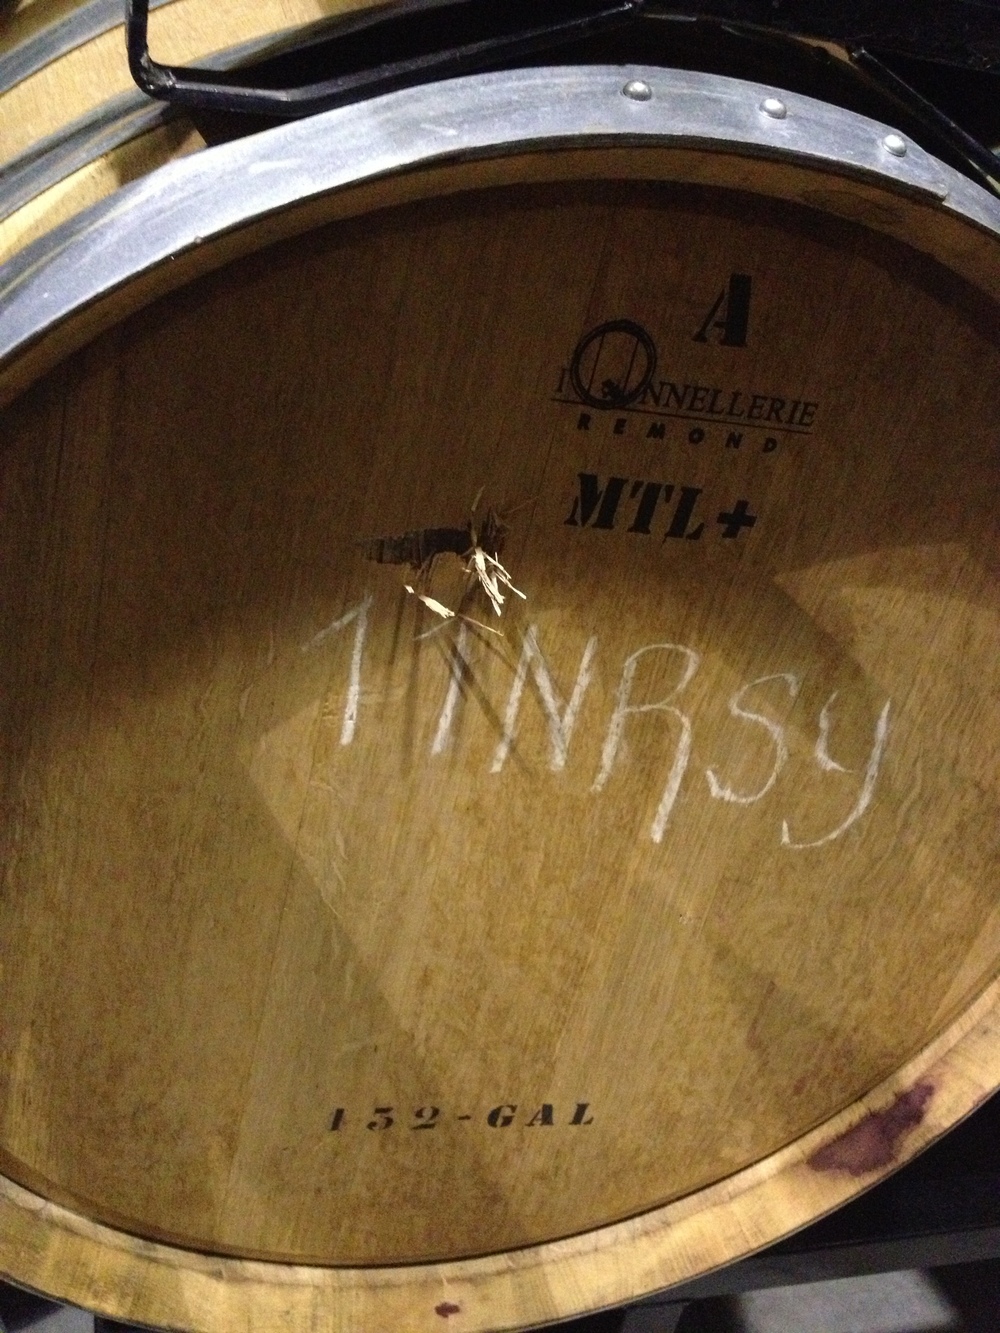  This barrel suffered a drive-by shooting outside their Walla Walla warehouse recently. Luckily the .45 Calibre bullet that came through the garage door didn't pierce the barrel, but ricocheted into the ceiling. That's bad-ass Syrah. **Also, no death